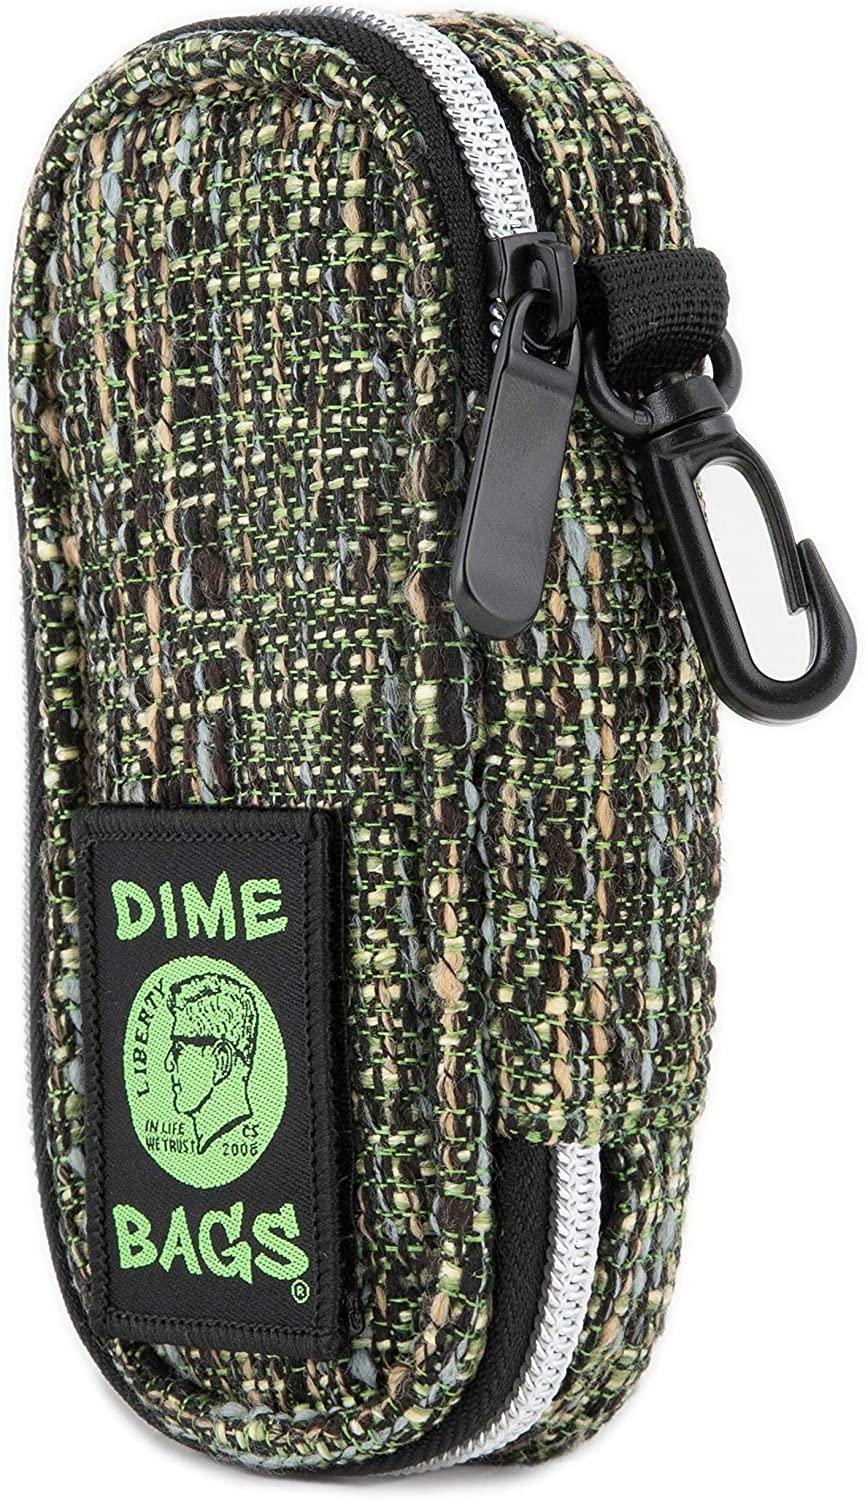 Dime Bags 8 Inch Padded Pouch